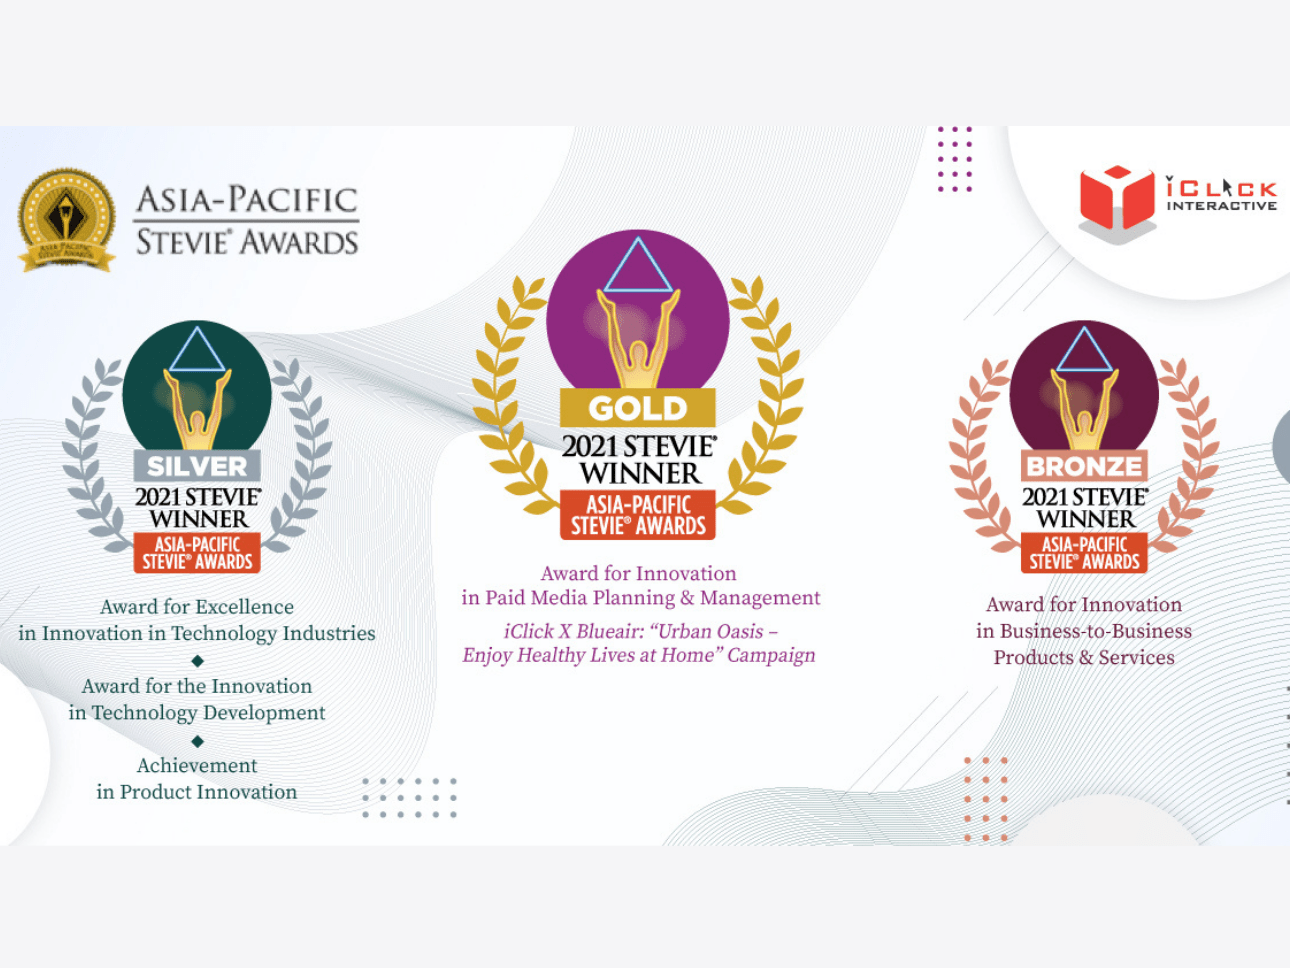 iClick Wins Five Prestigious Awards at 2021 Asia-Pacific Stevie Awards